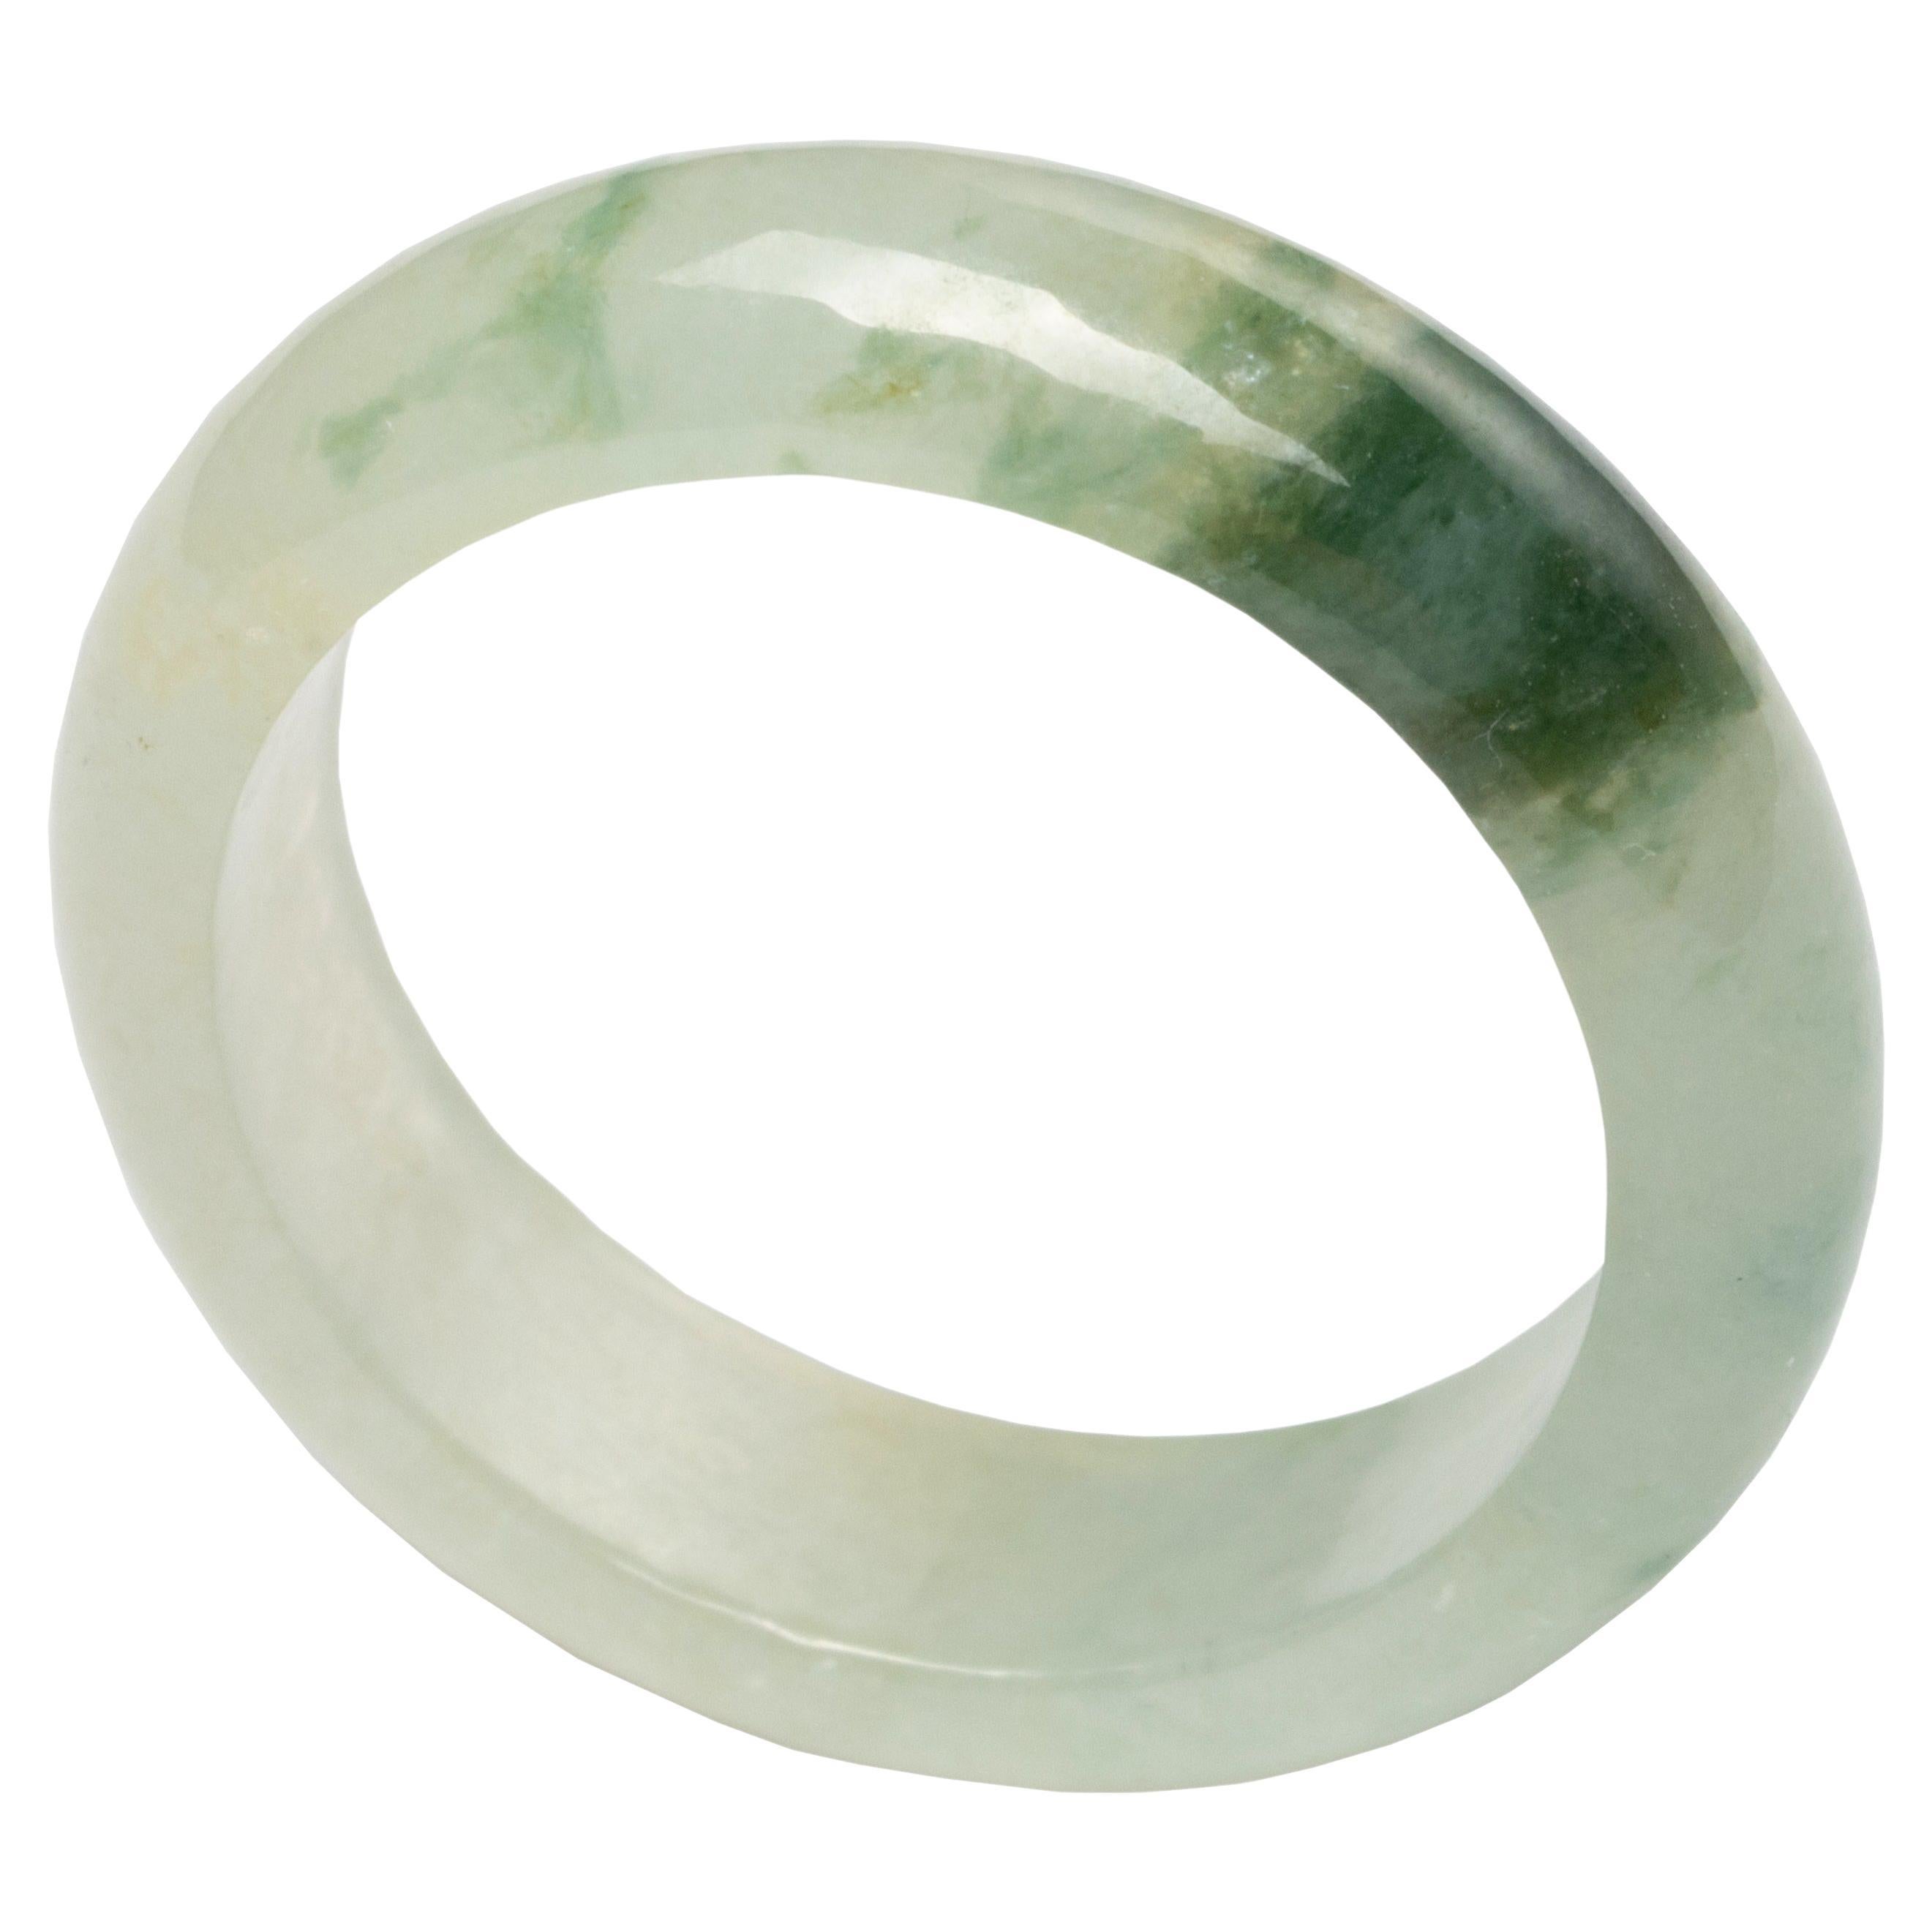 Carved Jadeite Jade Ring Near Colorless "Icy" & Green